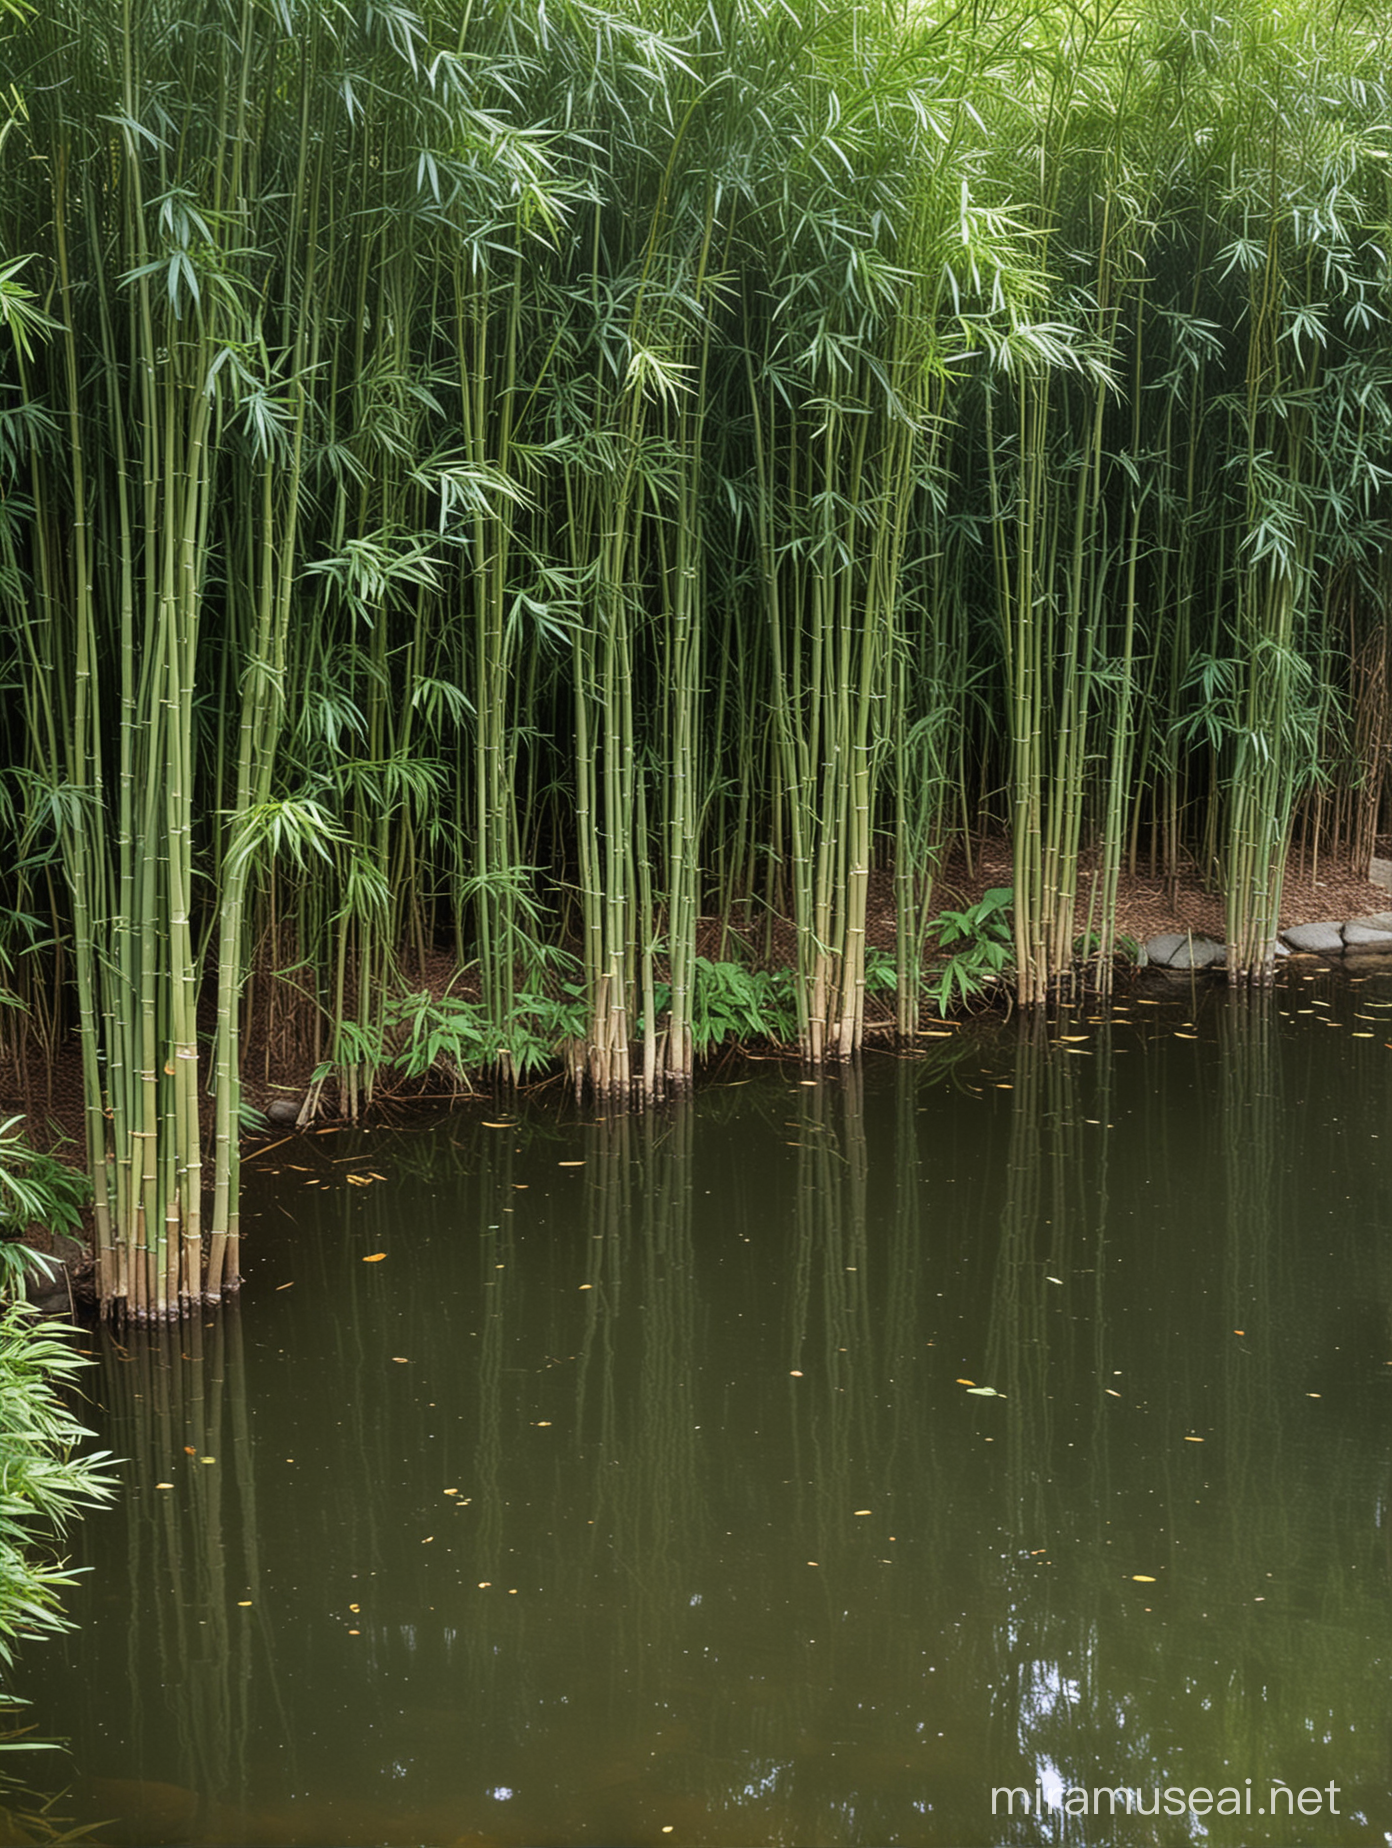 Tranquil Pond with Bamboo Clumps